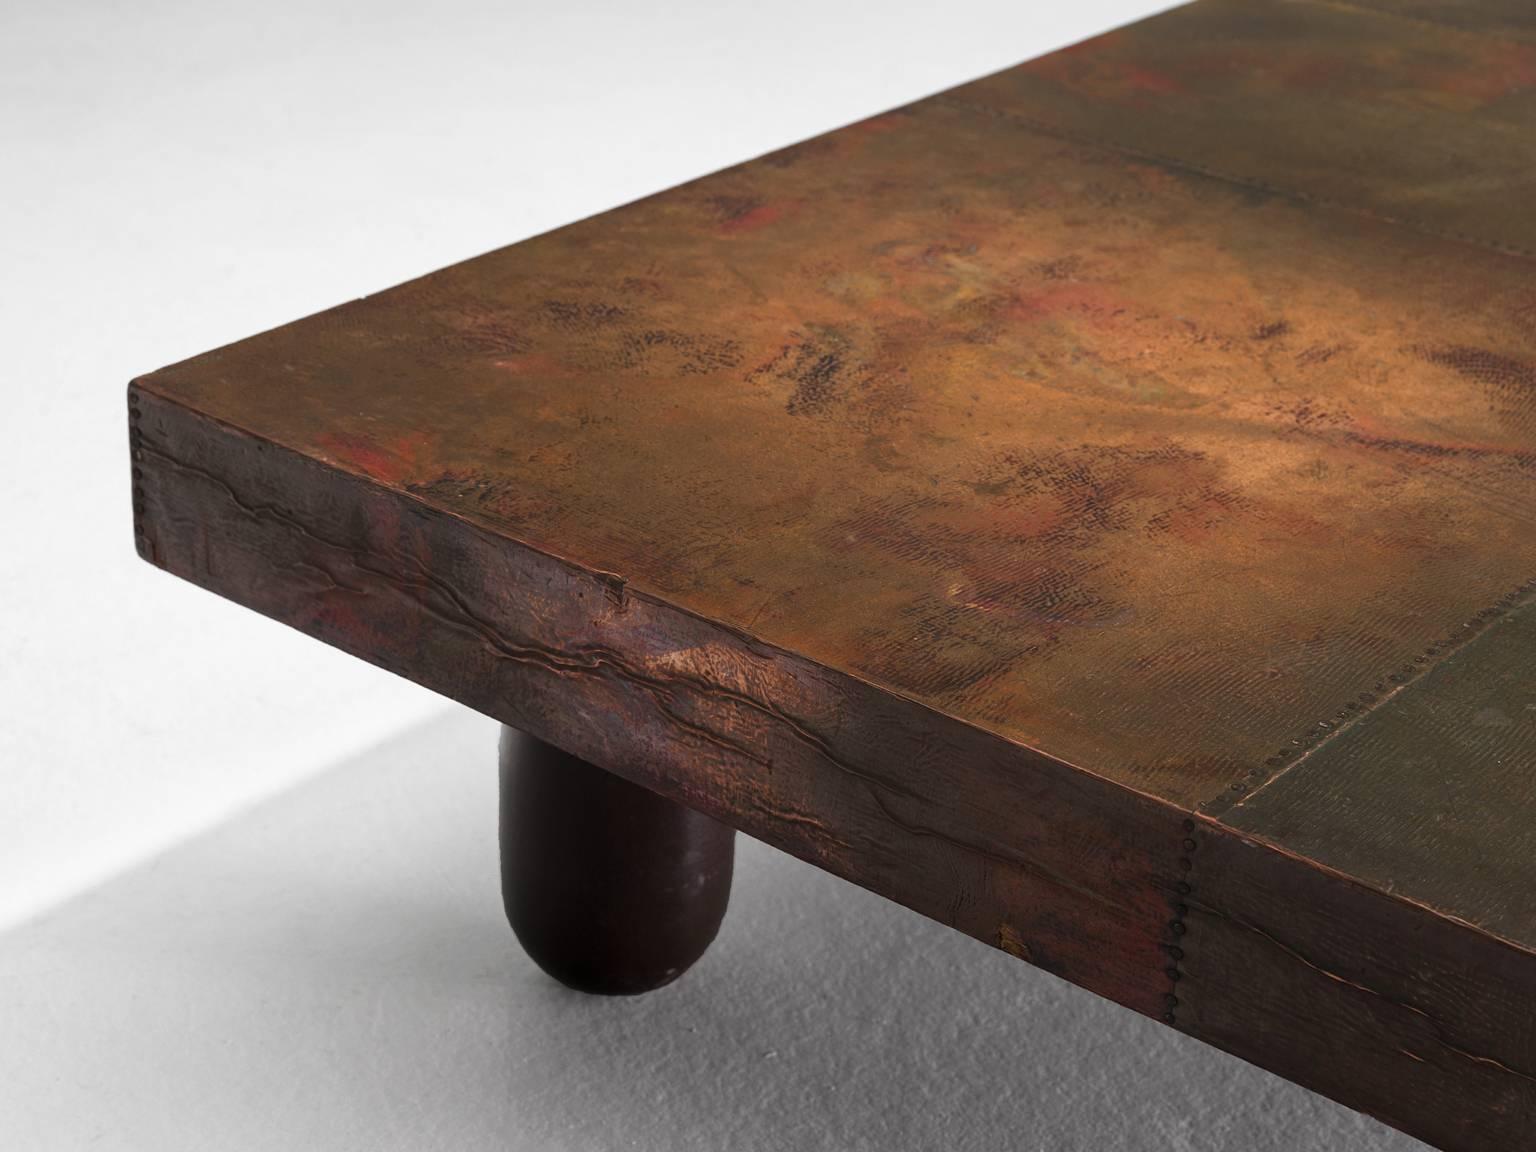 Coffee or cocktail table, copper and wood, 1960s, Italy.

This coffee table is an eye catcher. The copper is in beautiful, patinated condition and the vibrant yet natural rust or earth-like color is something out of this world. Lorenzo